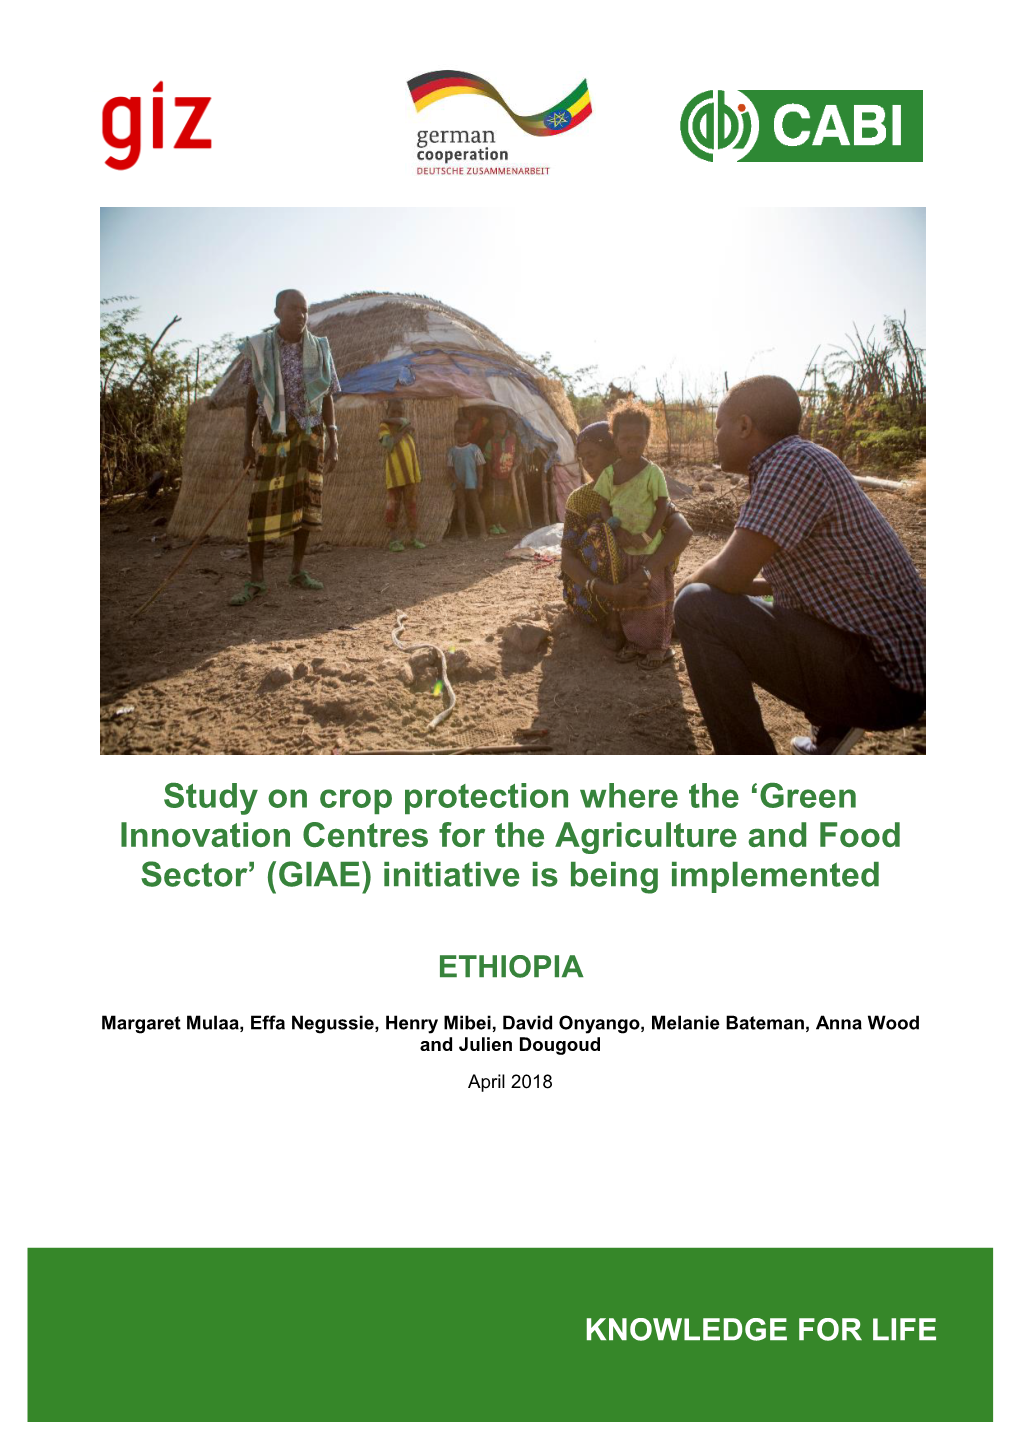 Study on Crop Protection Where the 'Green Innovation Centres for the Agriculture and Food Sector' (GIAE) Initiative Is Being